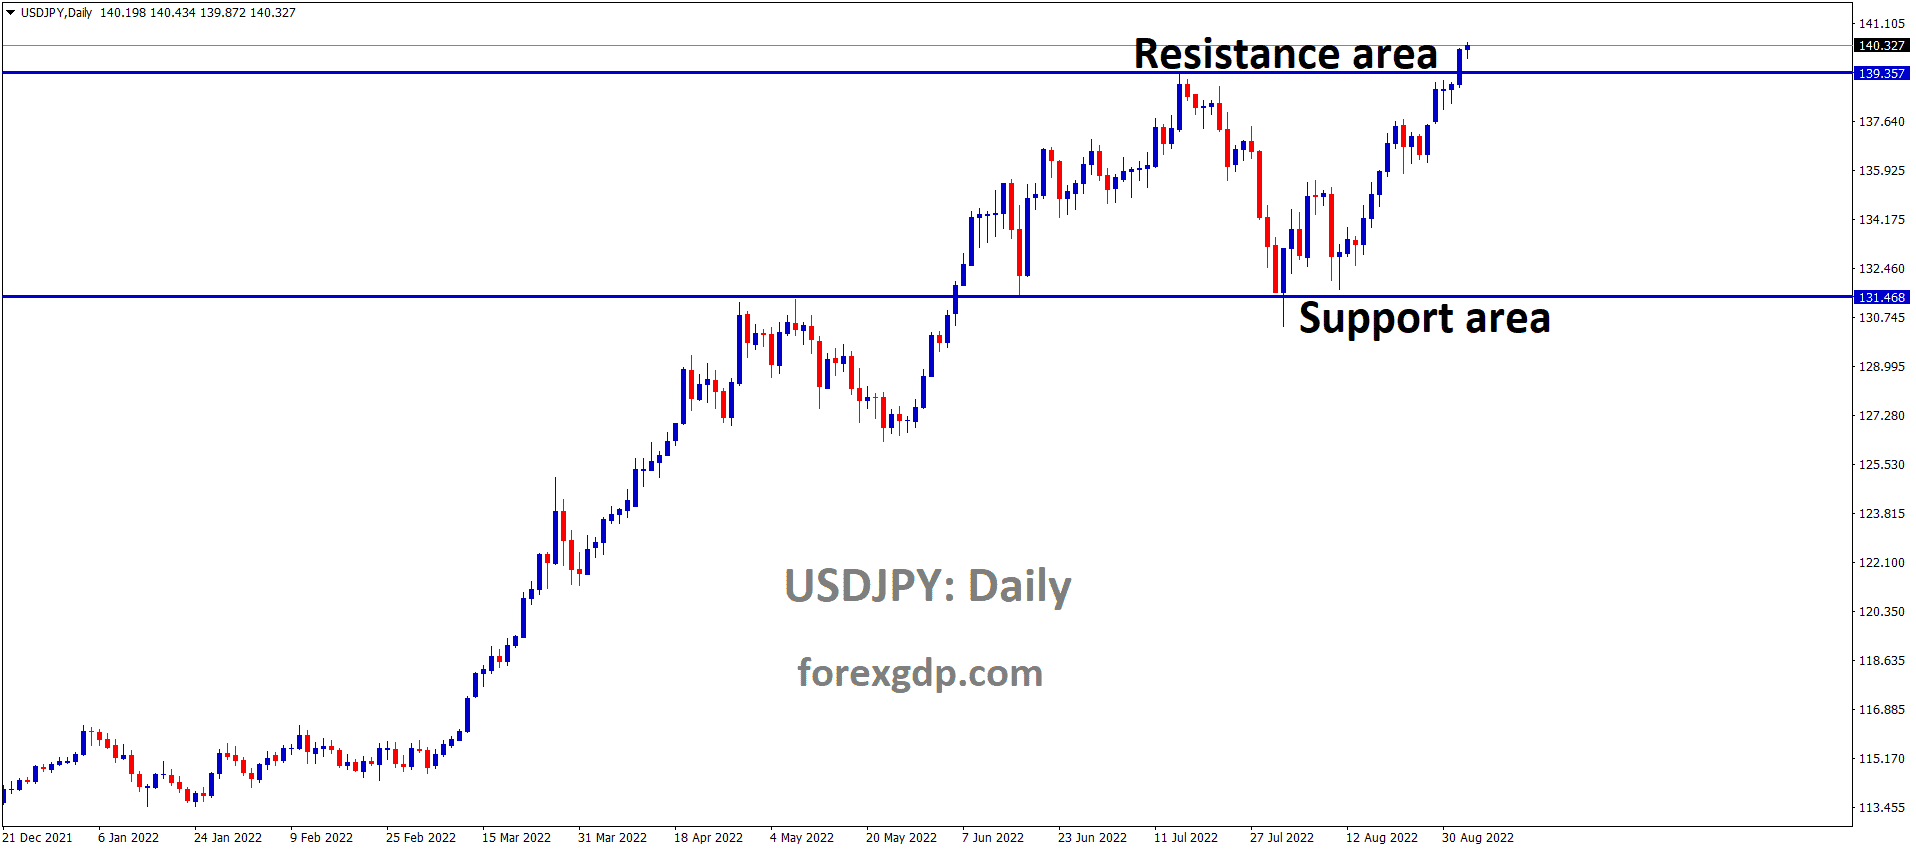 USDJPY is moving in the Box pattern and the market has reached the resistance area of the pattern.